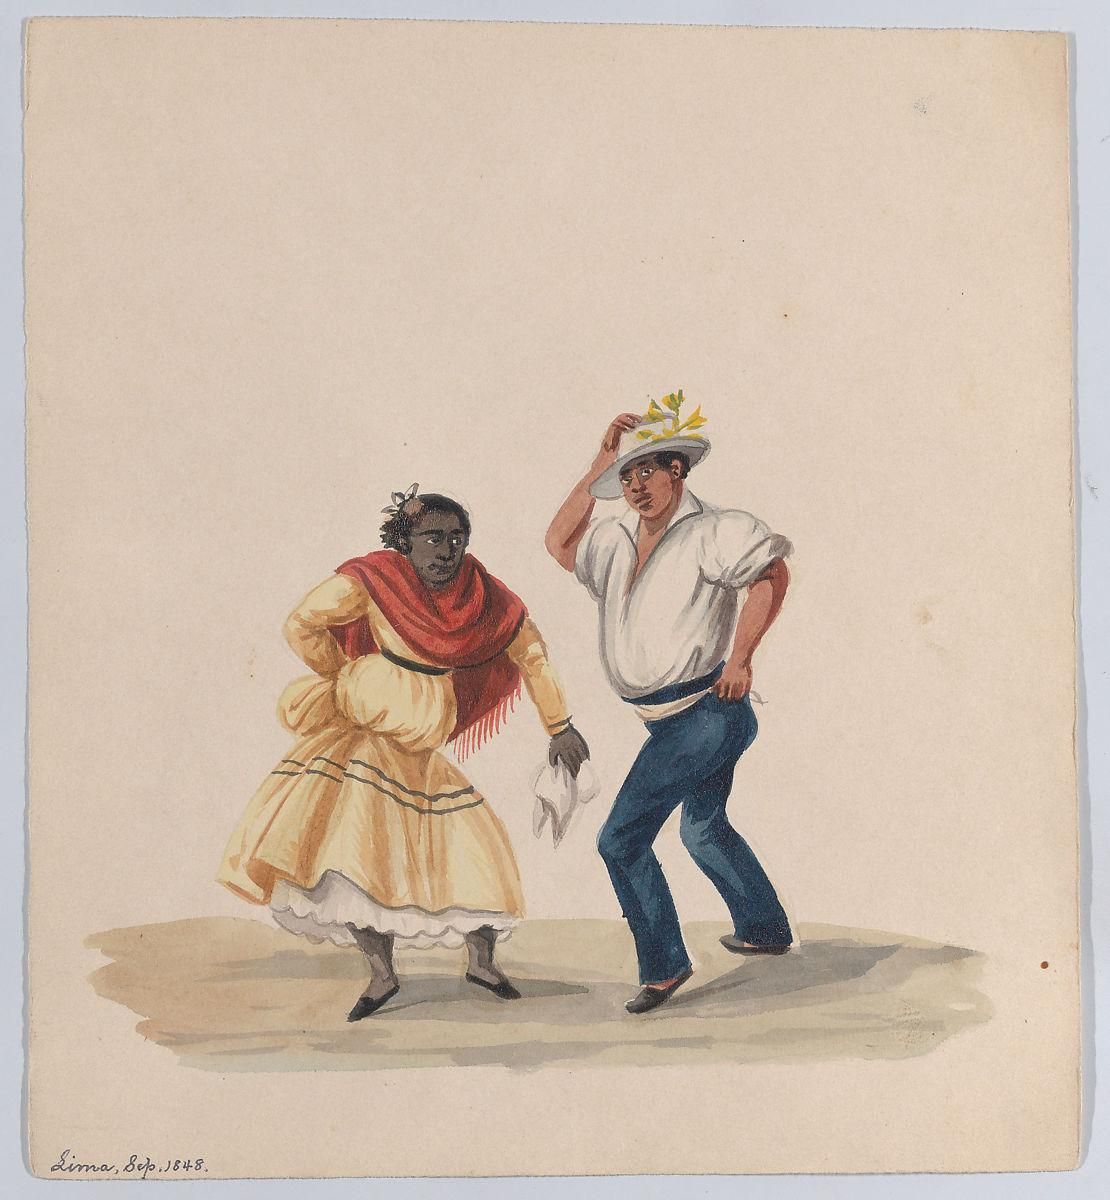 A man and a woman dancing, from a group of drawings depicting Peruvian costume